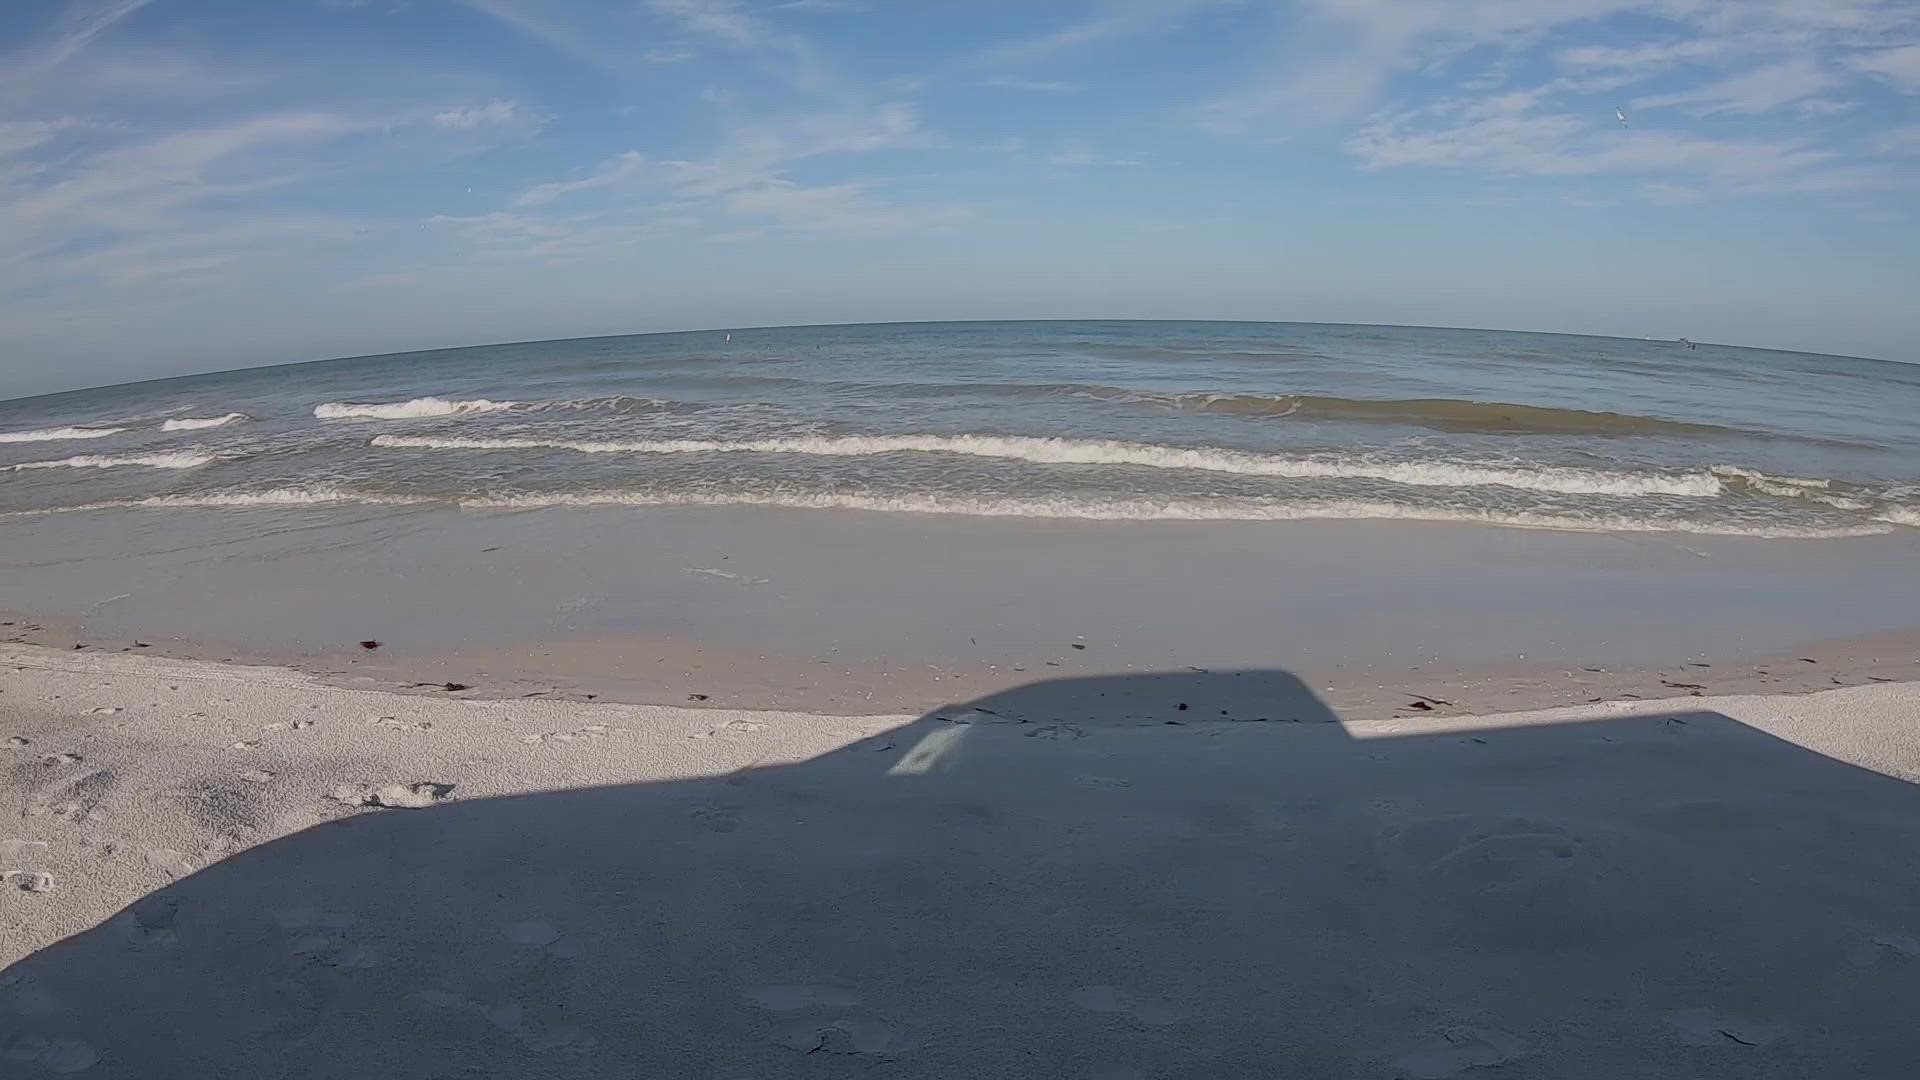 Clearwater Marine Aquarium biologists observed more than 300 sea turtle nests in Pinellas County.